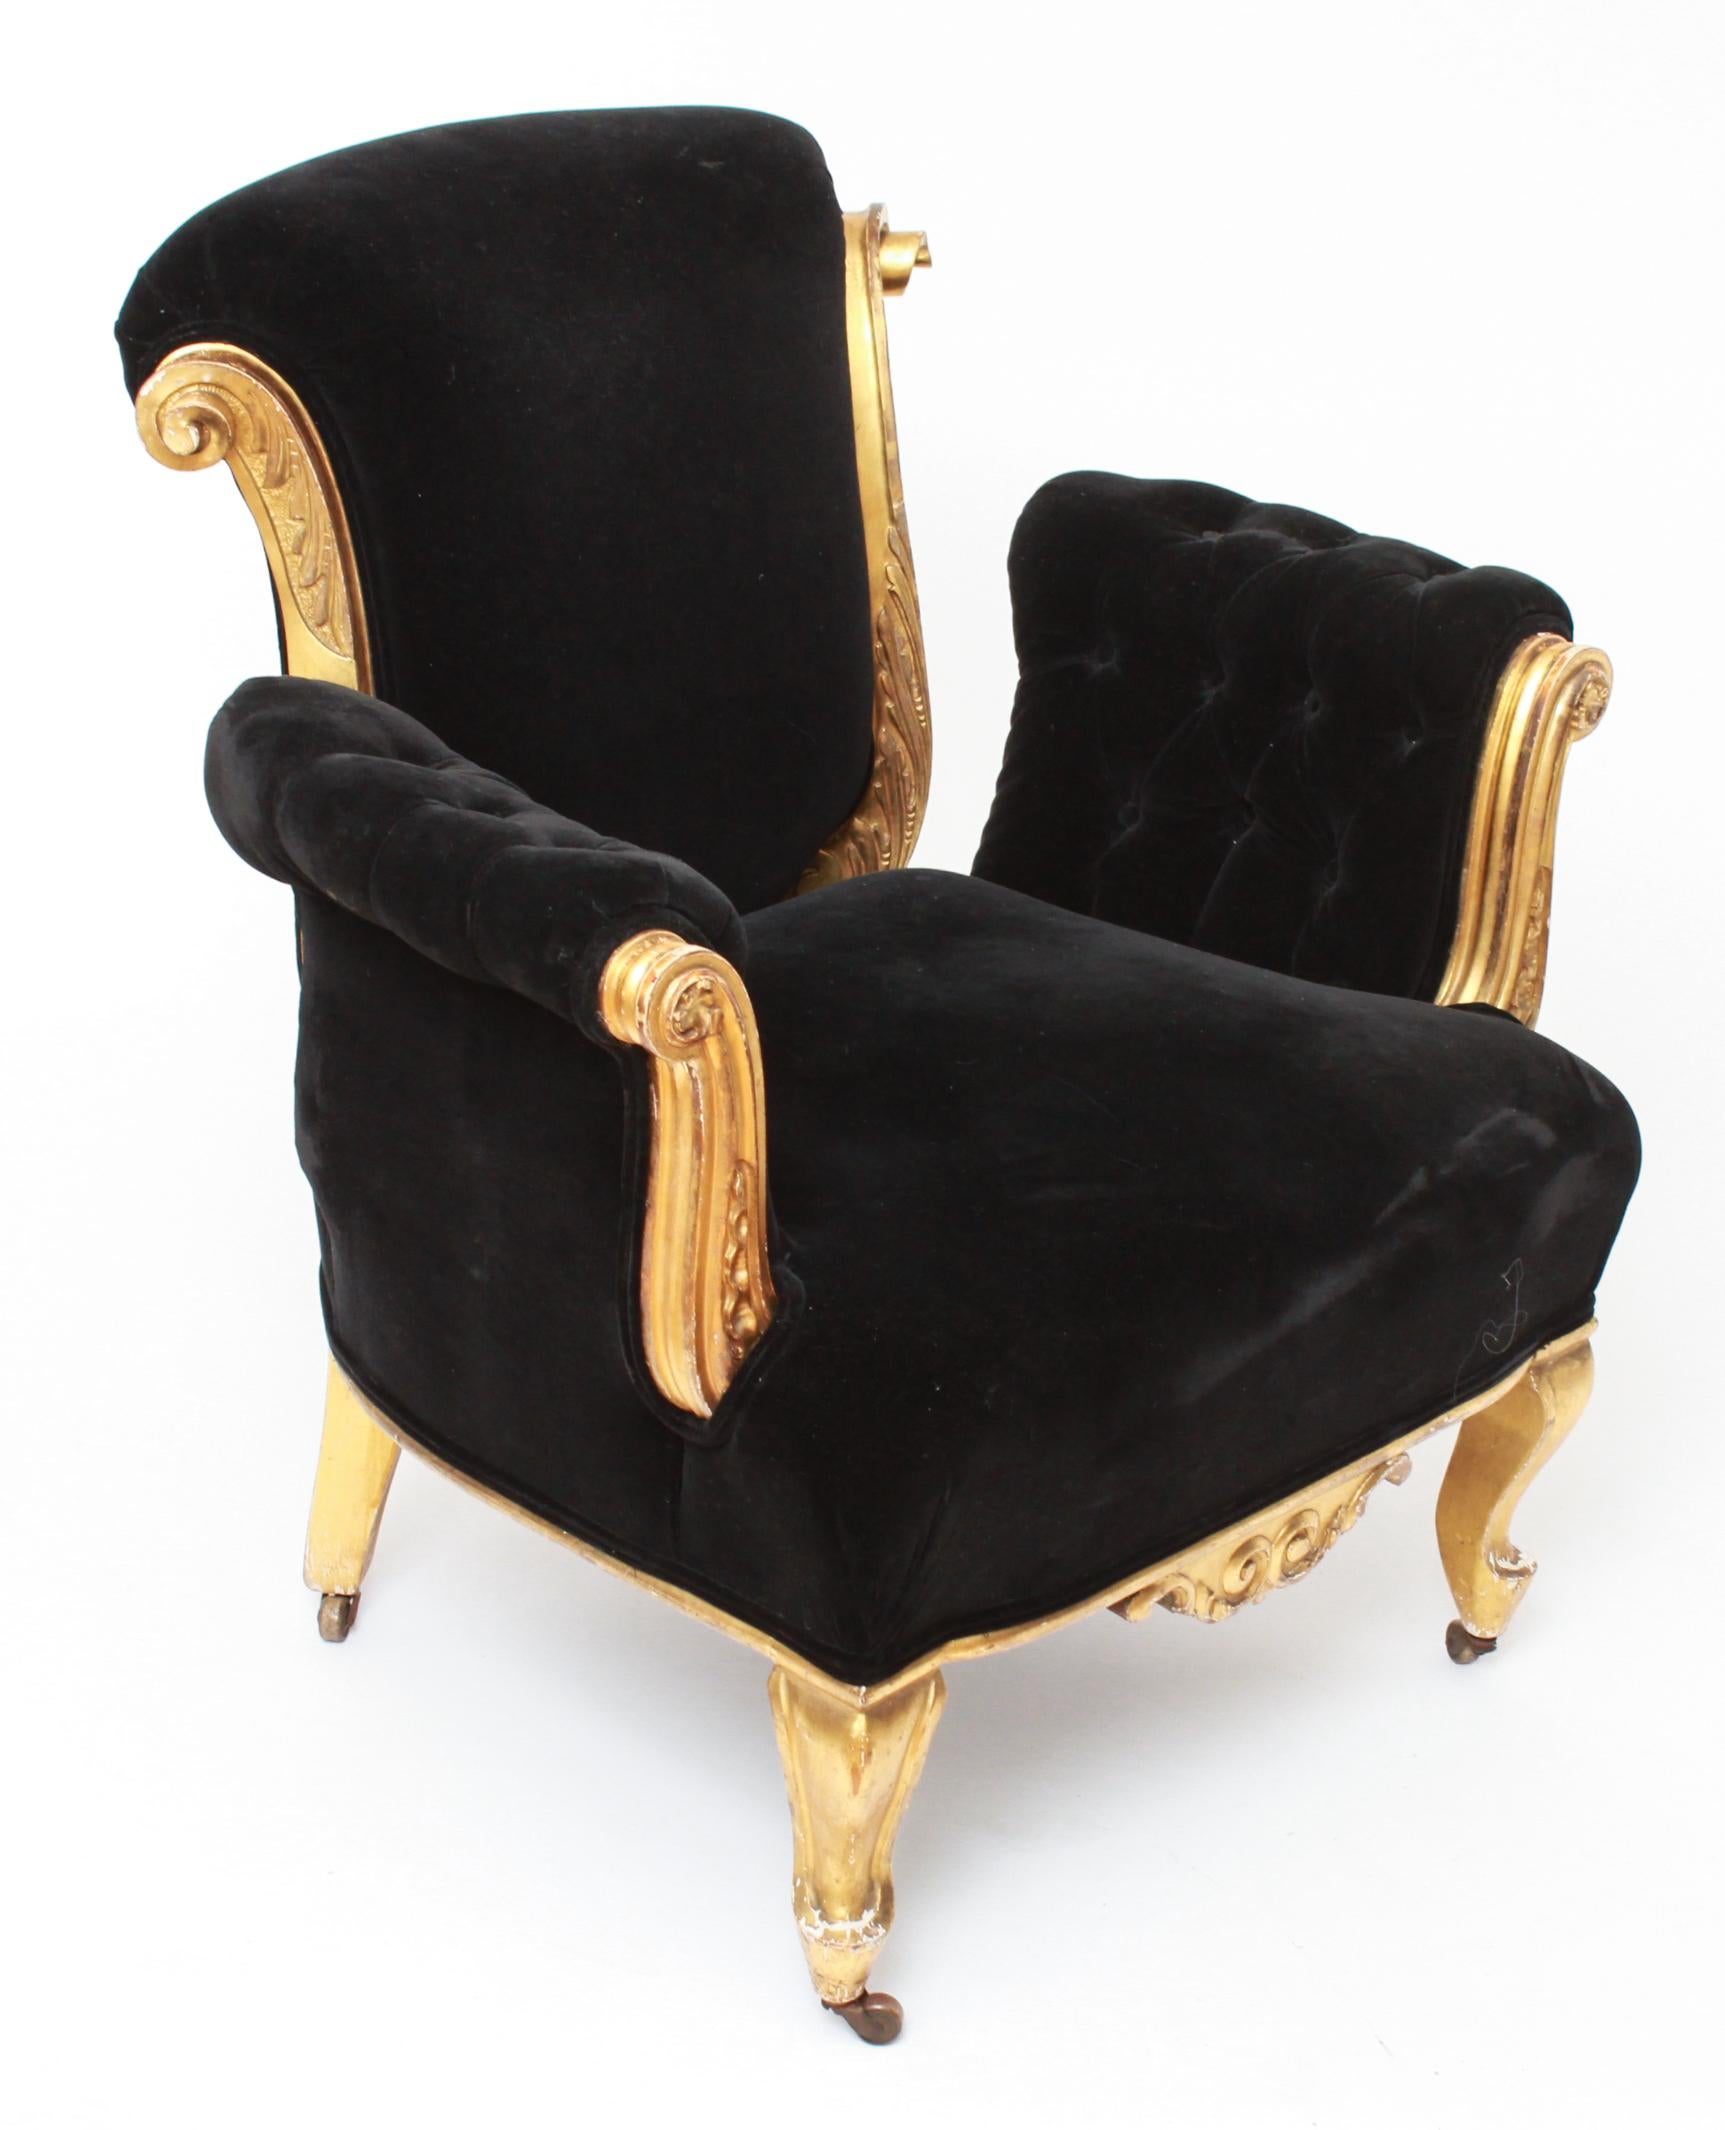 French Art Deco style gilt gesso wood with leaf and scroll motif armchair. The piece has black velvet upholstery with button-tufted arms.
In great vintage condition with age-appropriate wear and use. Mark on back seat of fabric.